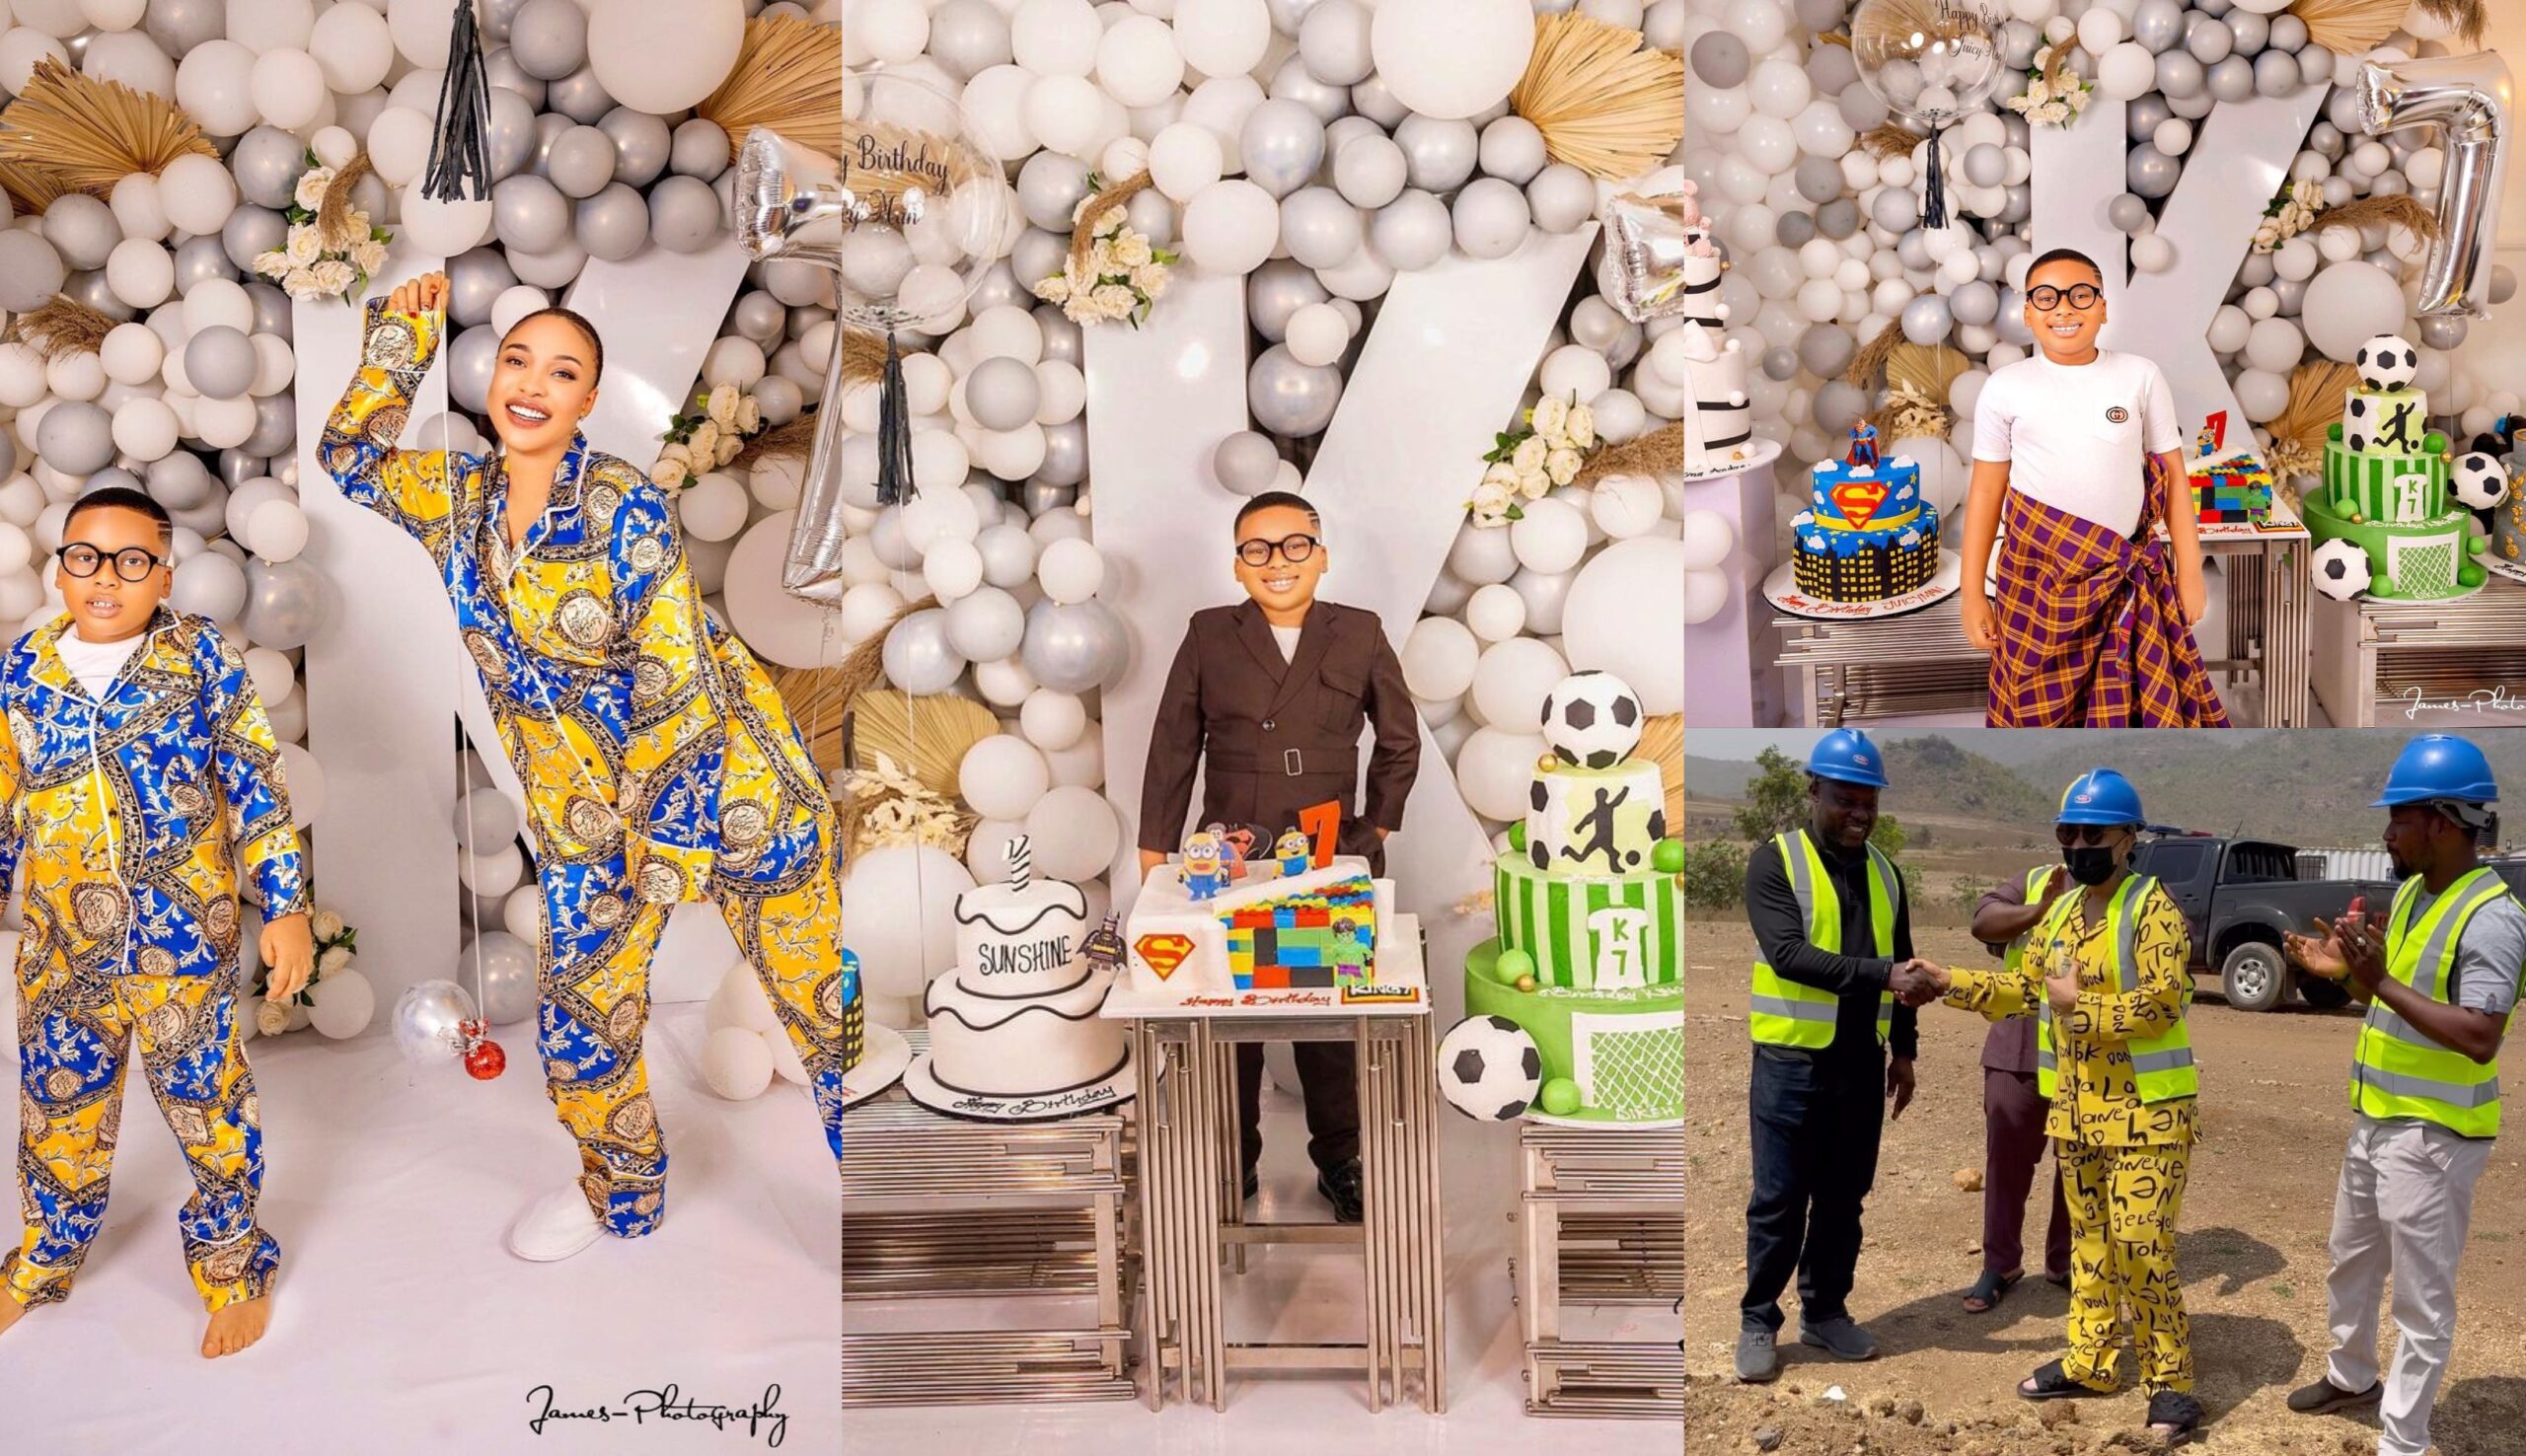 Tonto Dikeh surprises her son with 7 gigantic cake and a plot of land on his 7th birthday (Photos)